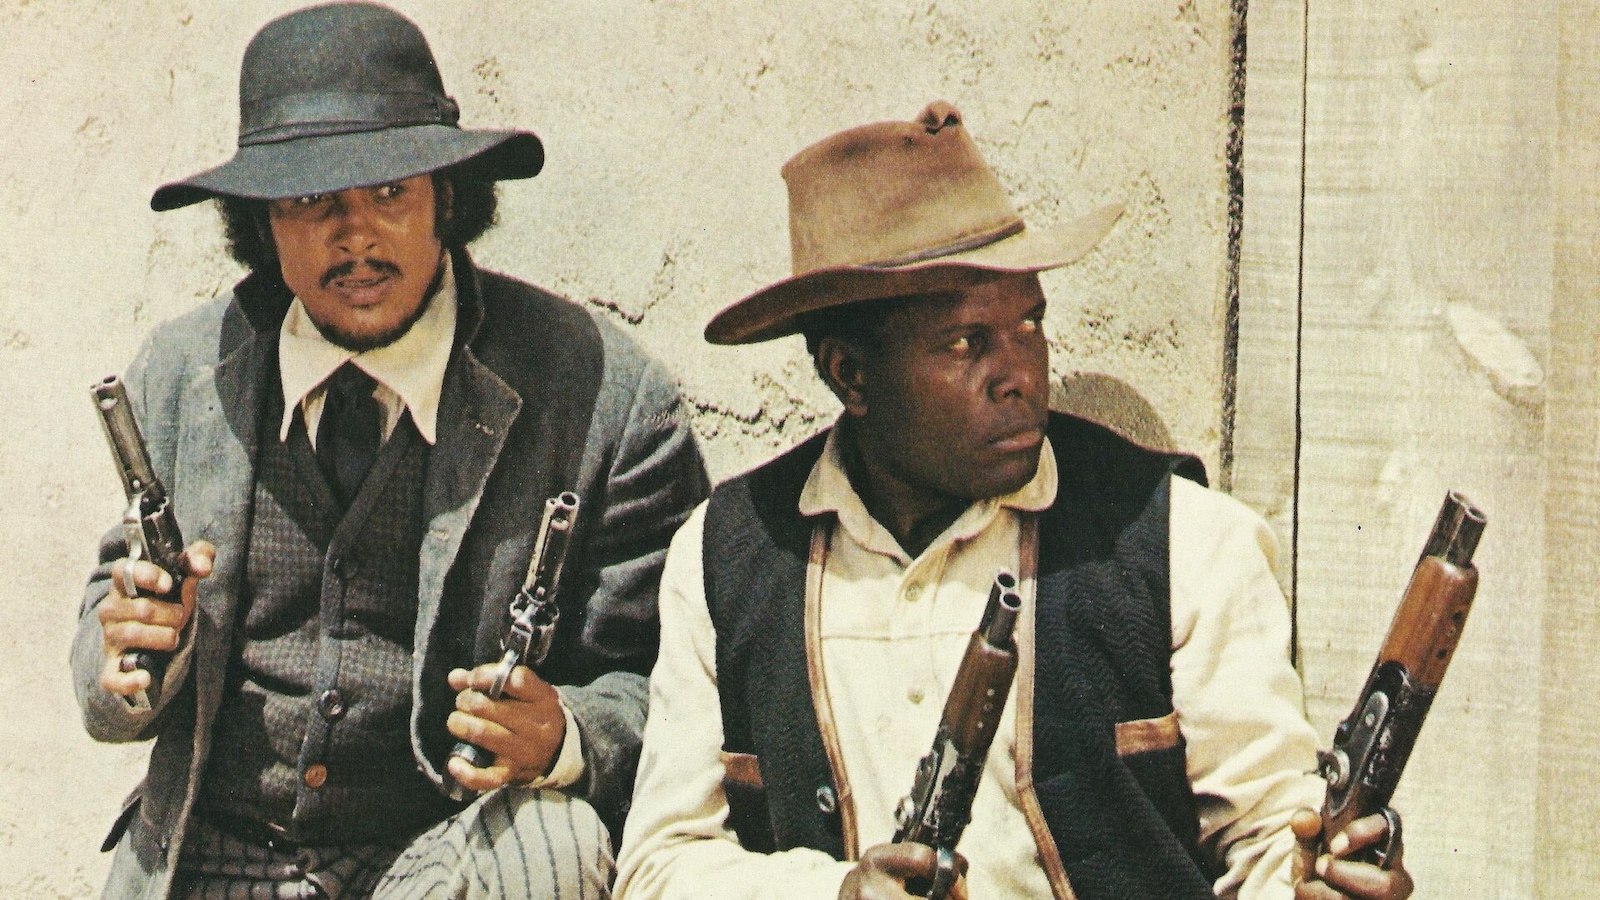 A still from the film Buck and the Preach: Two men dressed in cowboy era clothing lean against a wall, old pistols in each hand. 